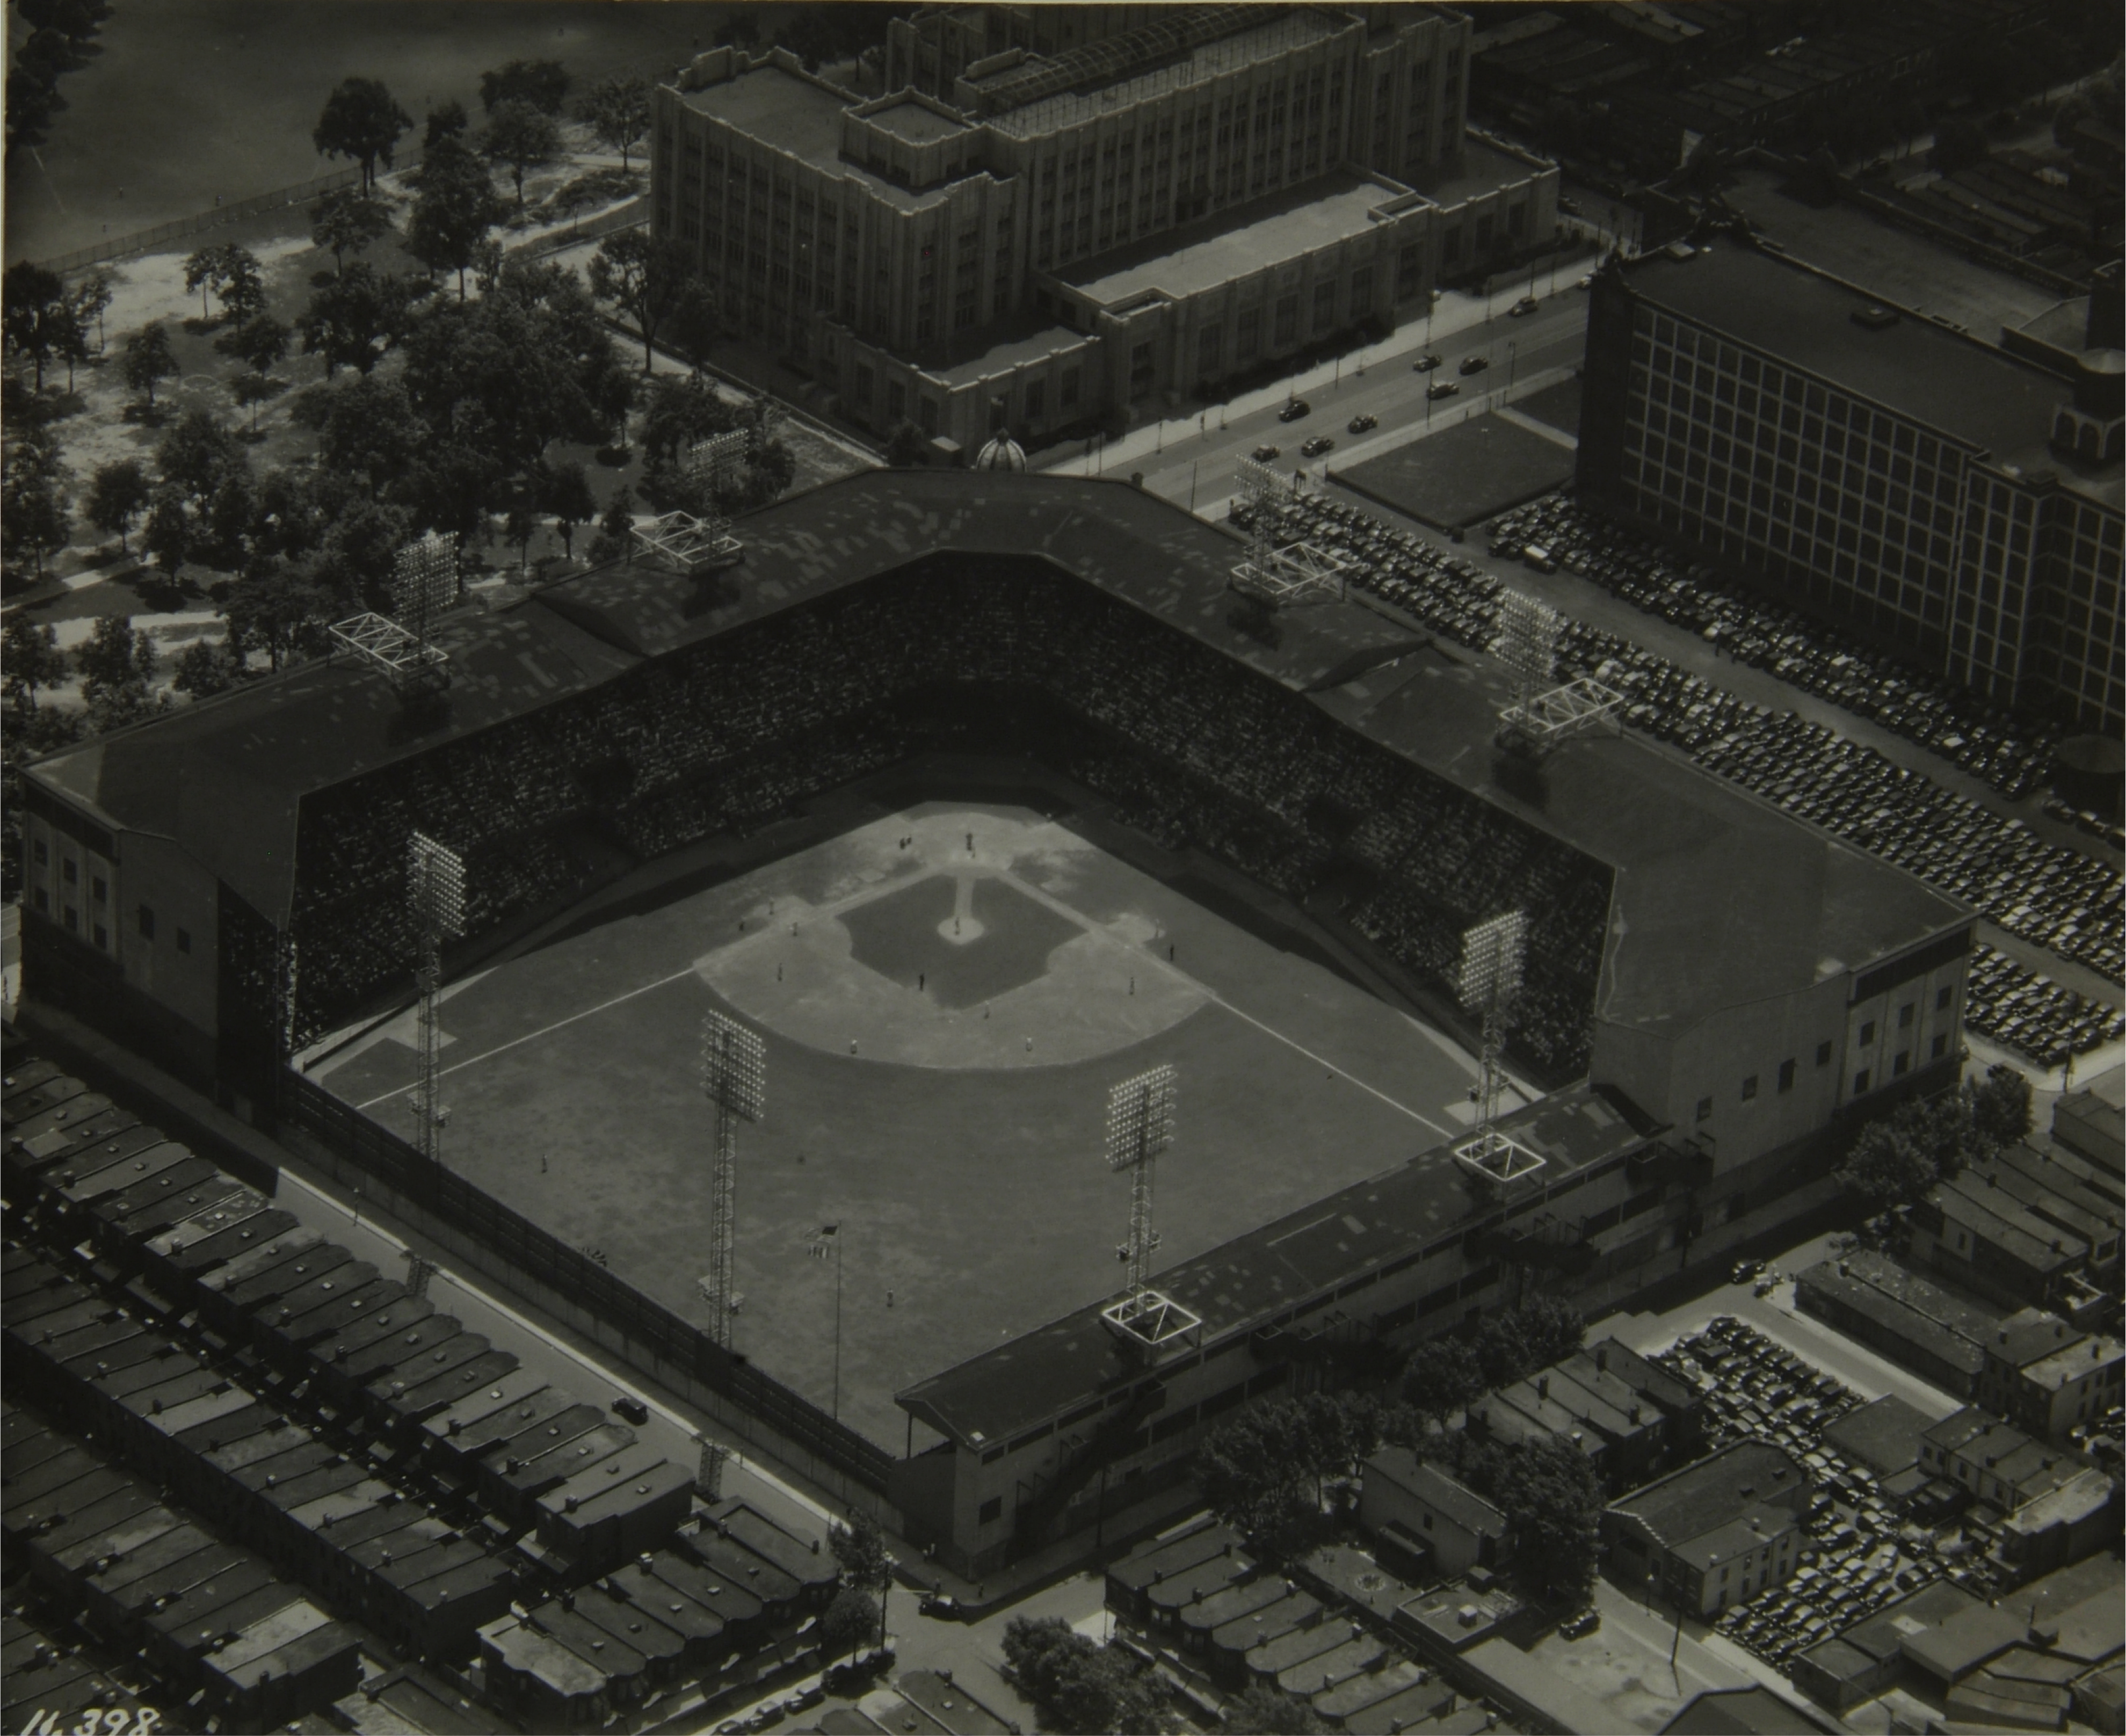 Shibe Park Record Number: 1085Collection: Philadelphia Record Photograph Morgue [V07] Reproduction restrictions: Unknown Date of Original: 1941 Aerial view of Shibe Park, later known as Connie Mack stadium. One-time home of the Philadelphia Athletic and the Philadelphia Phillies.